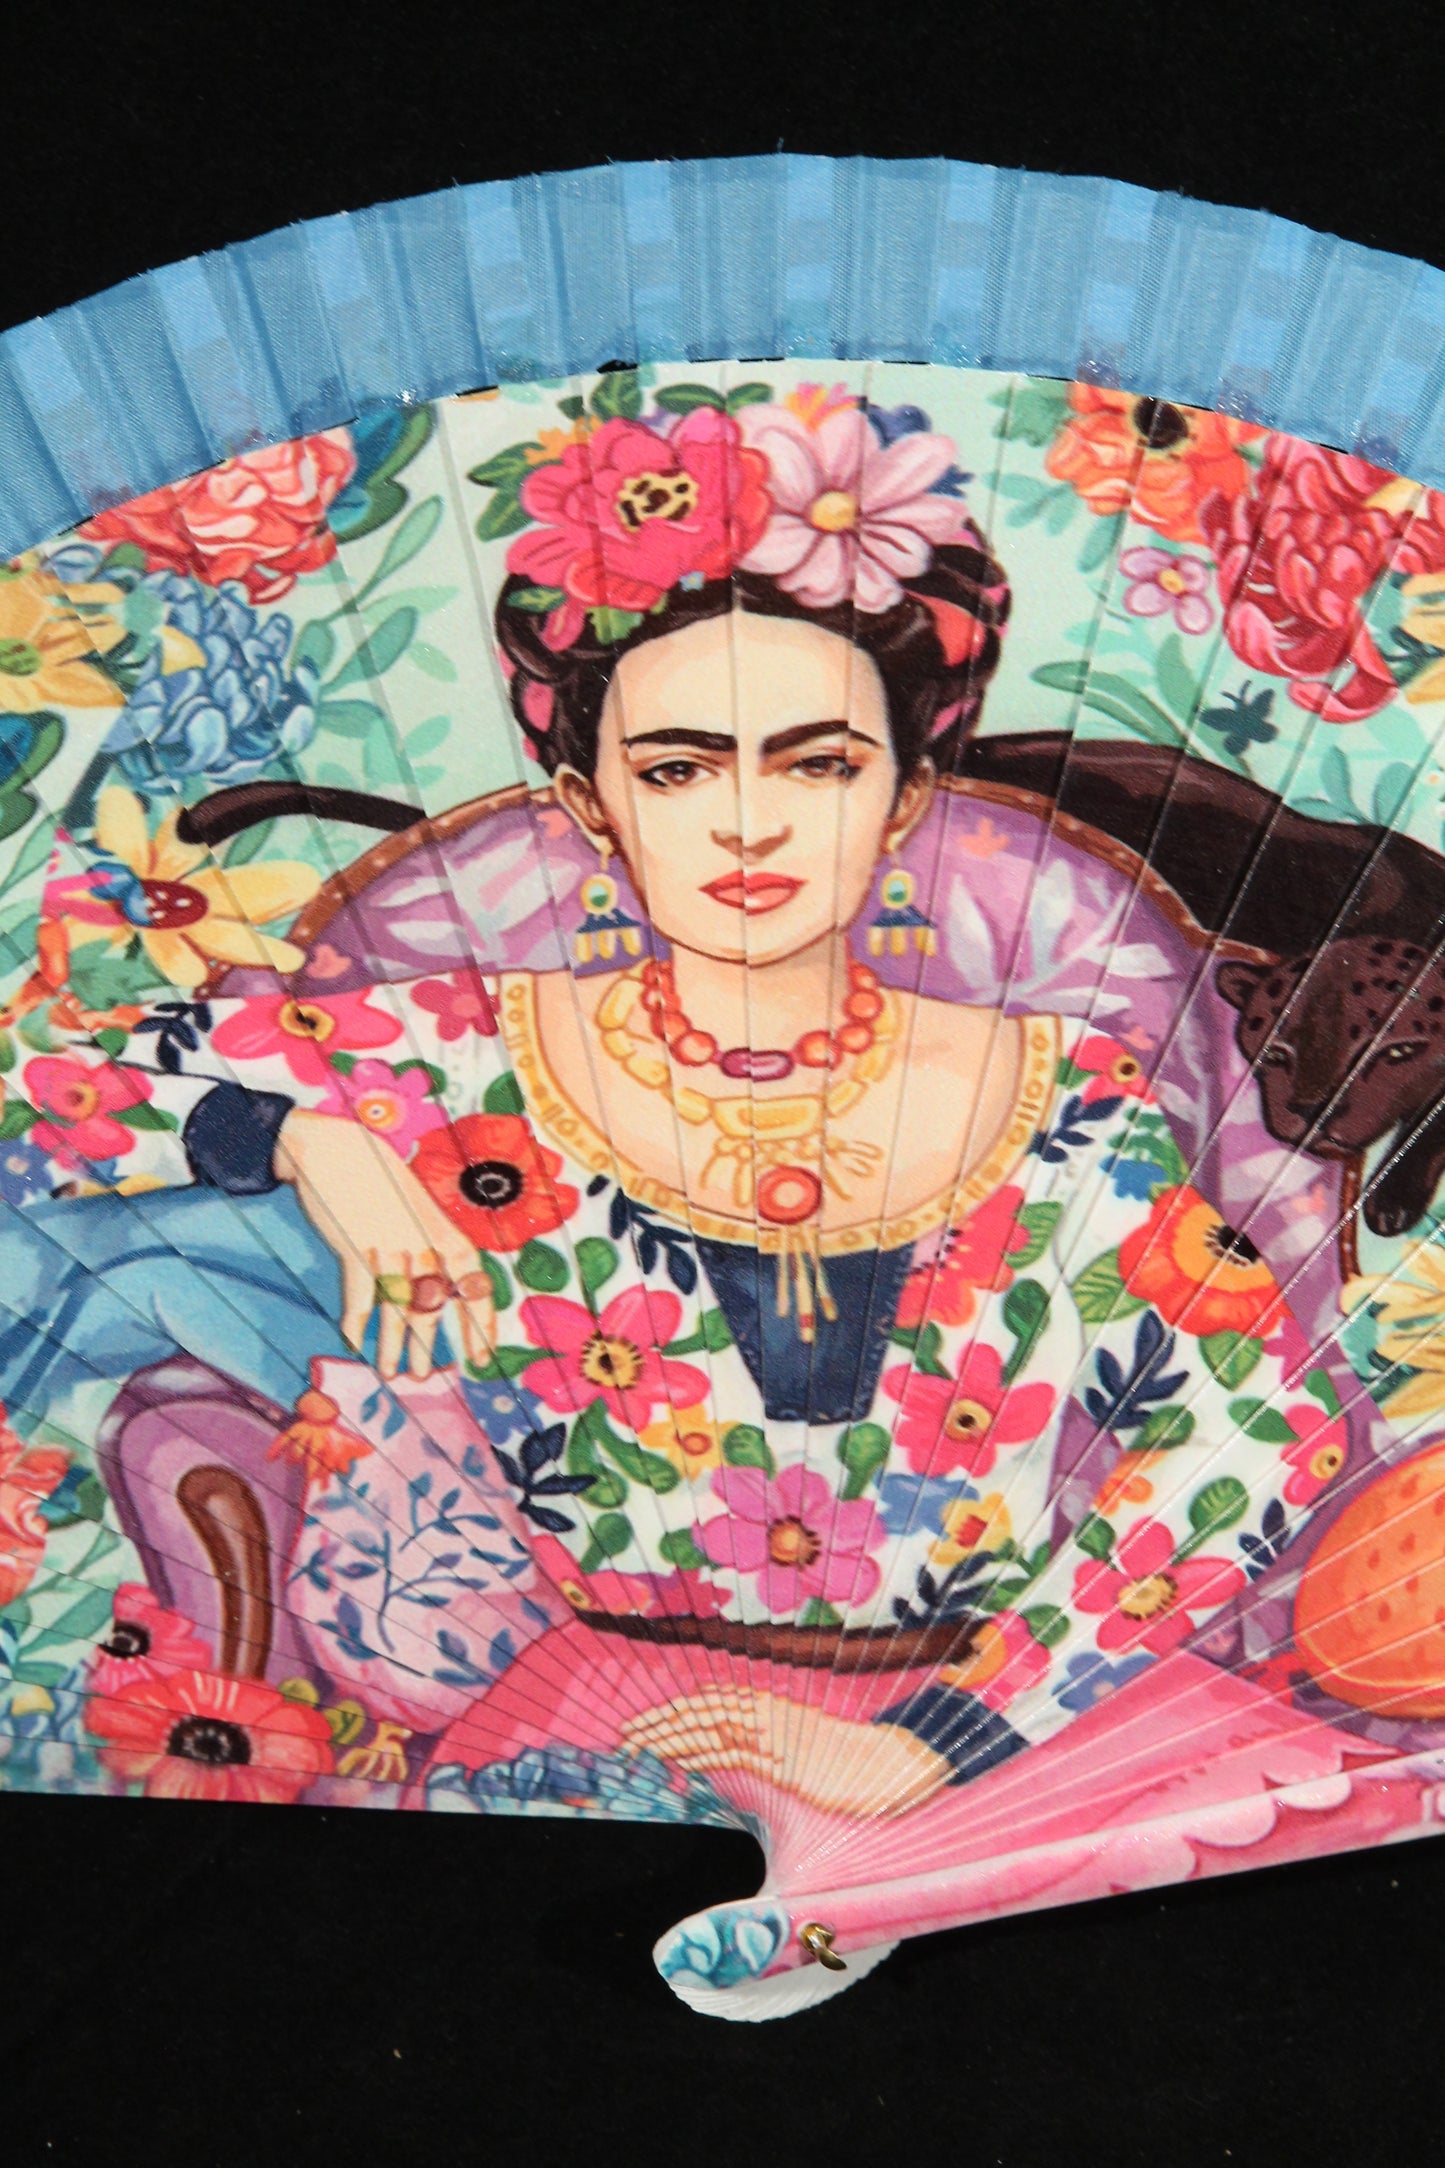 New "Frida" Hand Fan Direct from Spain Lacquered Wood/Paper Blue